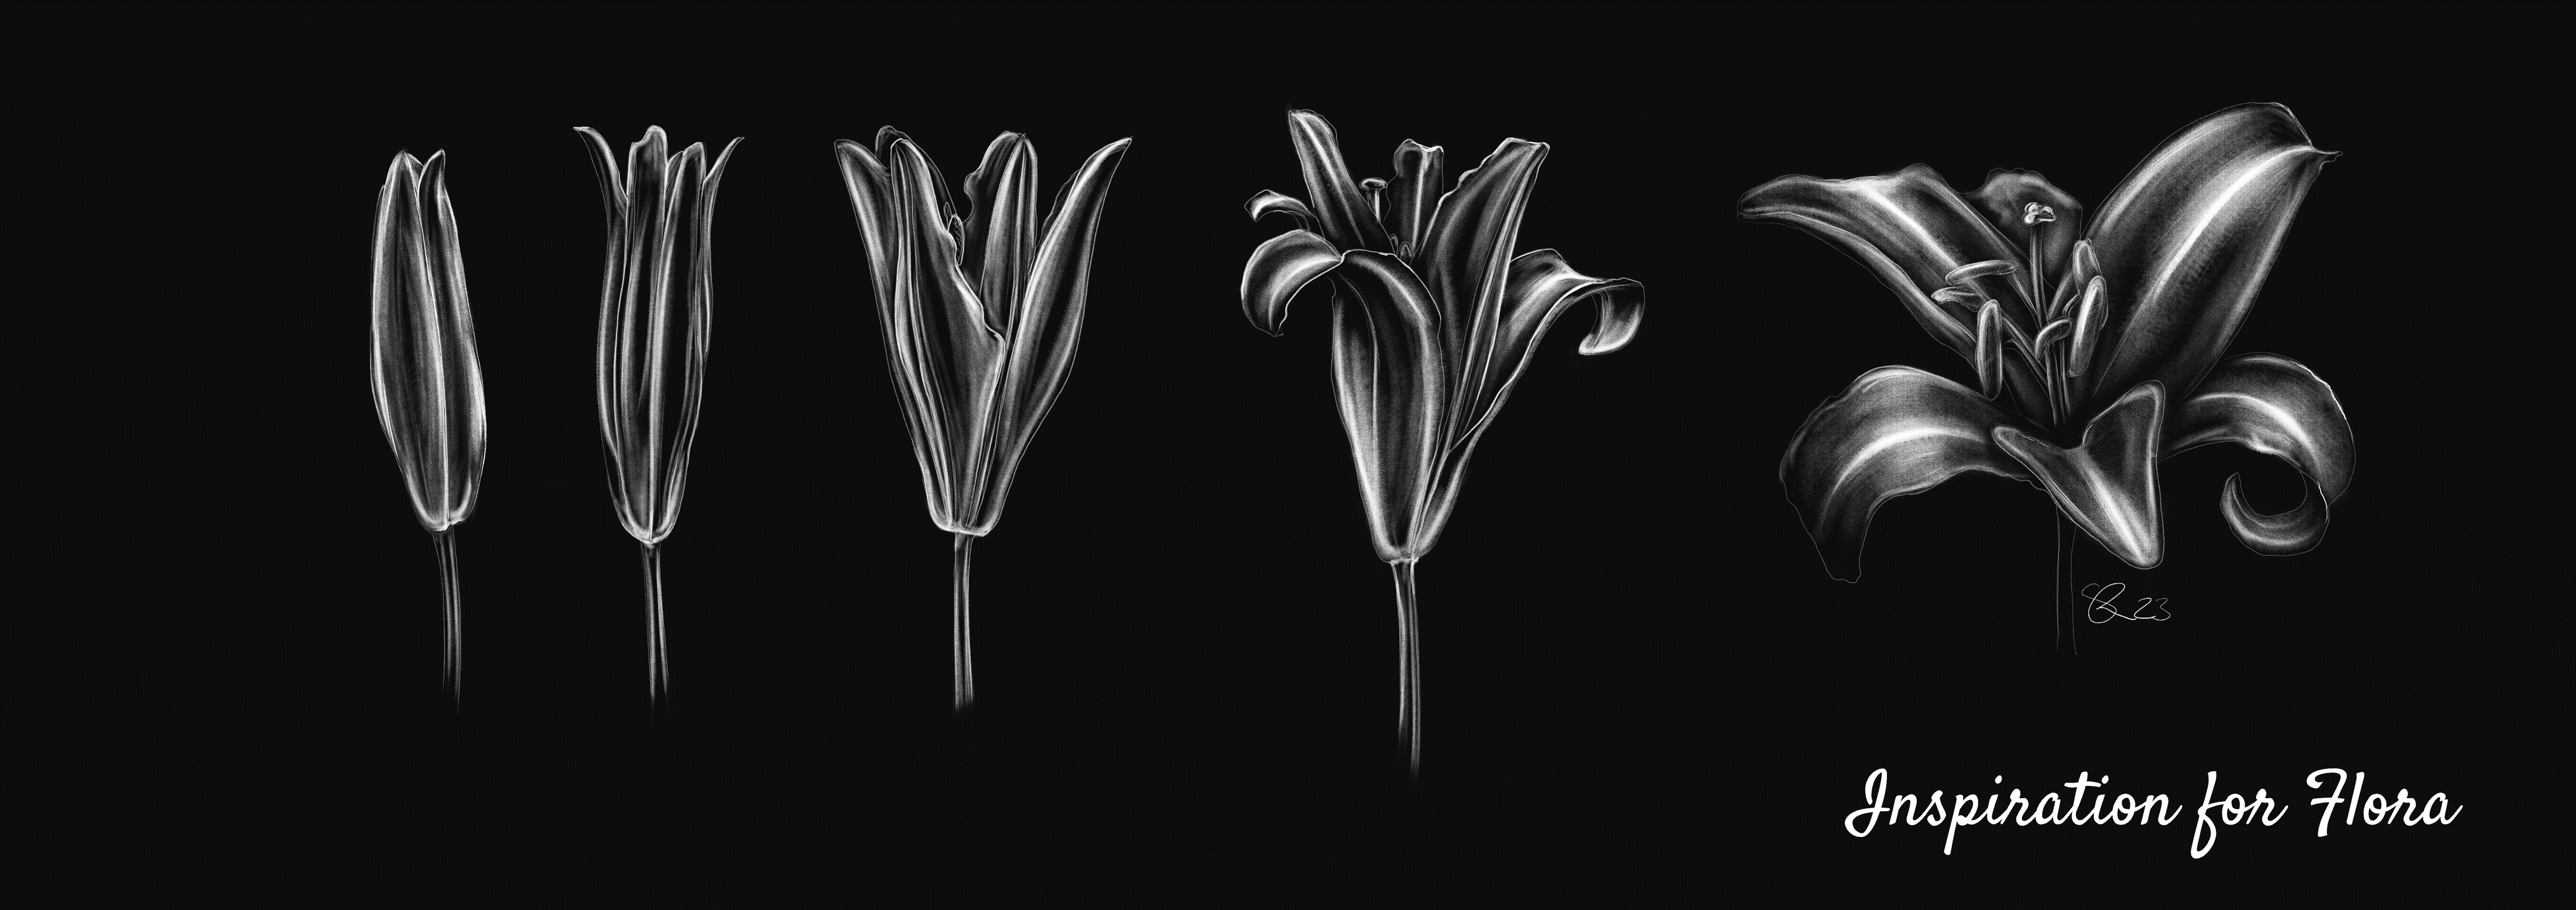 Black and white sketch of a flower in different stages of blooming.